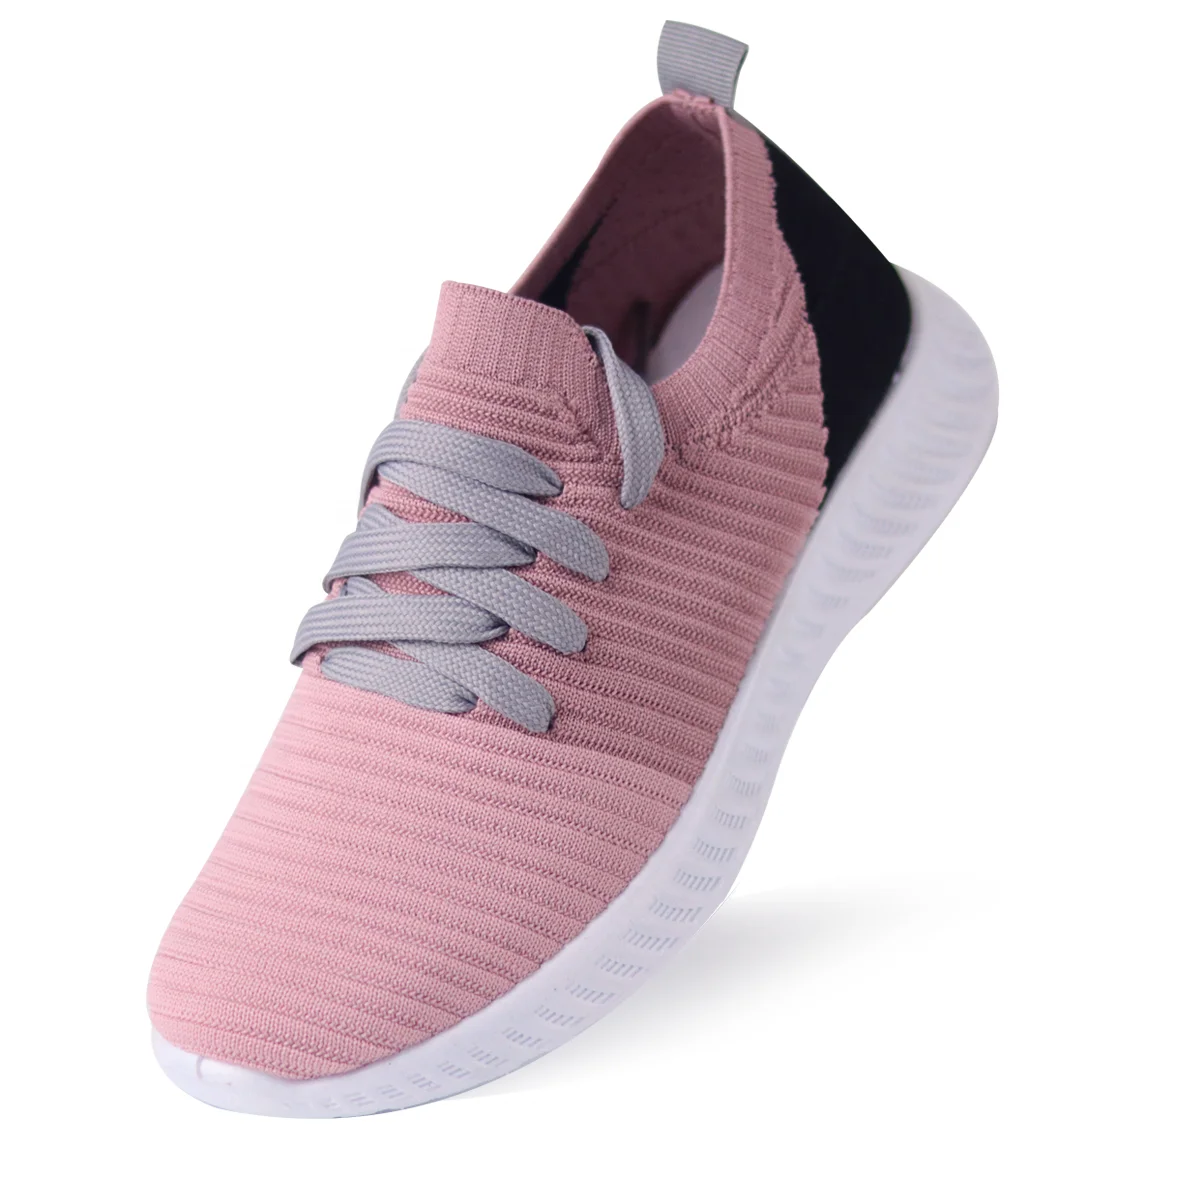 

2021 New Summer Slip-on Fly Knit Casual Sneakers Breathable Women's Fashion Shoes Women Sneaker, As pictures showed